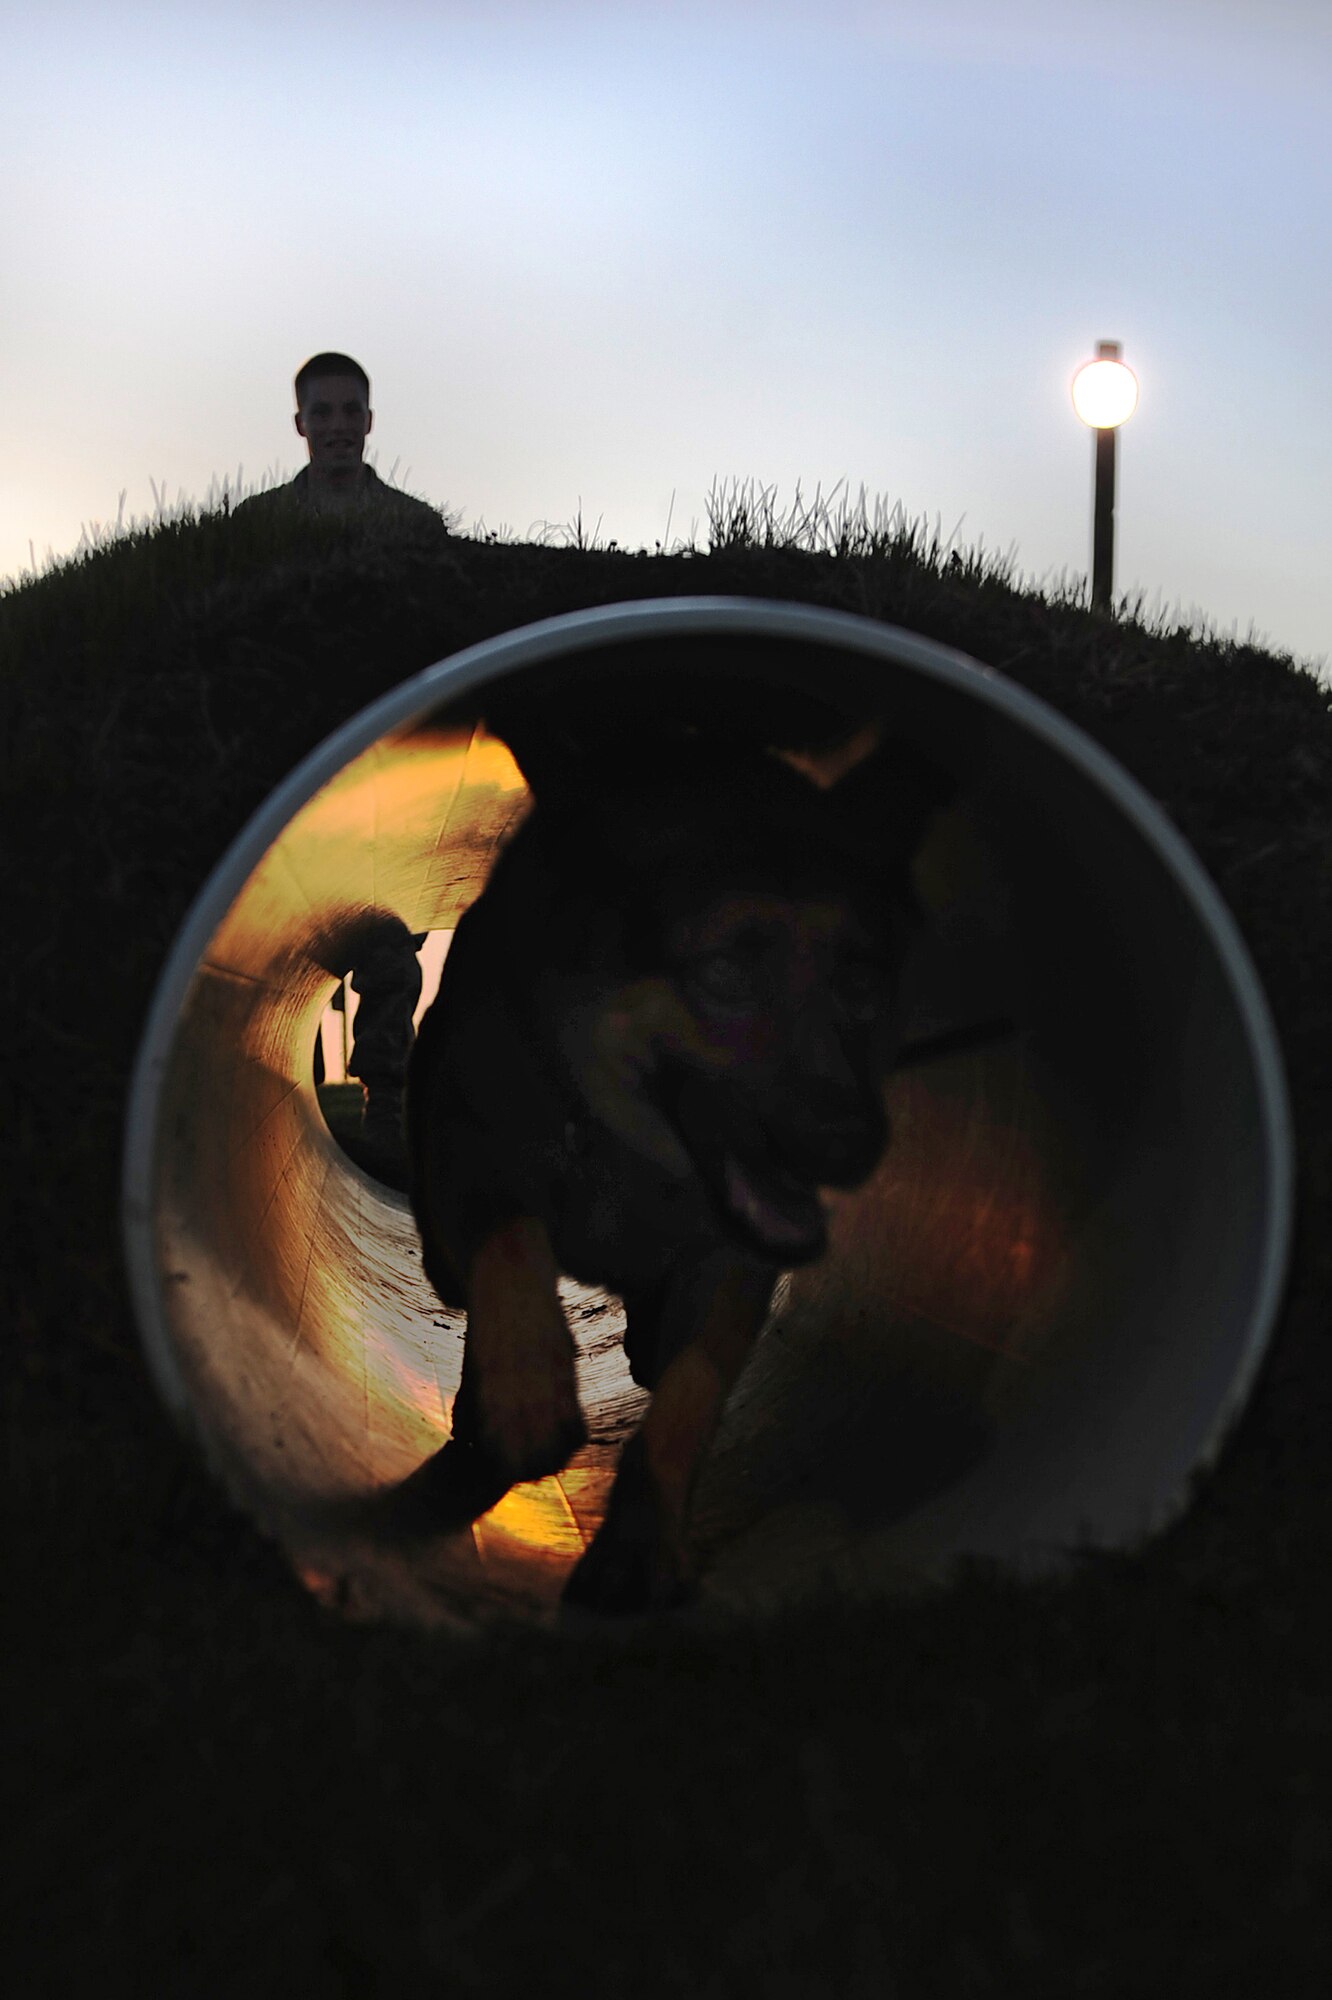 Senior Airman William Knight, 28th Security Forces Squadron dog handler, watches as Rex, a 28 SFS military working dog, runs through a tunnel in the obstacle course, here, May 7.  Military working dogs perform obedience training to ensure they listen to their handler. (U.S. Air Force photo/Airman 1st Class Joshua J. Seybert)